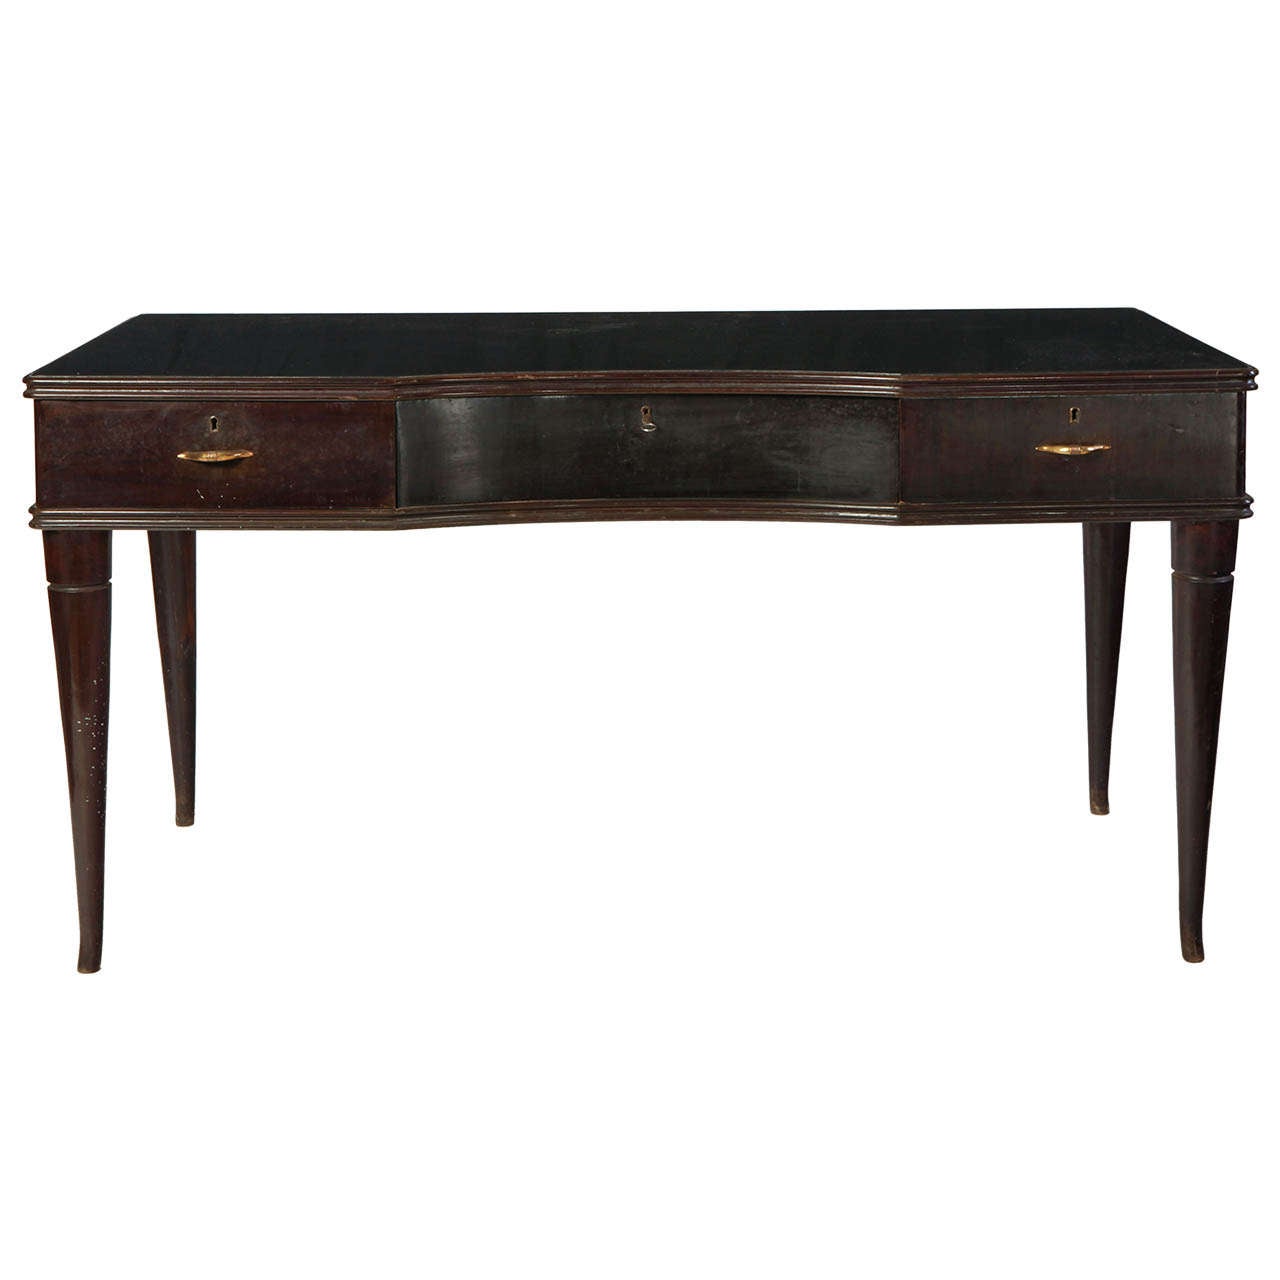 Italian Writing Table in Lacquered Wood with Three Drawers